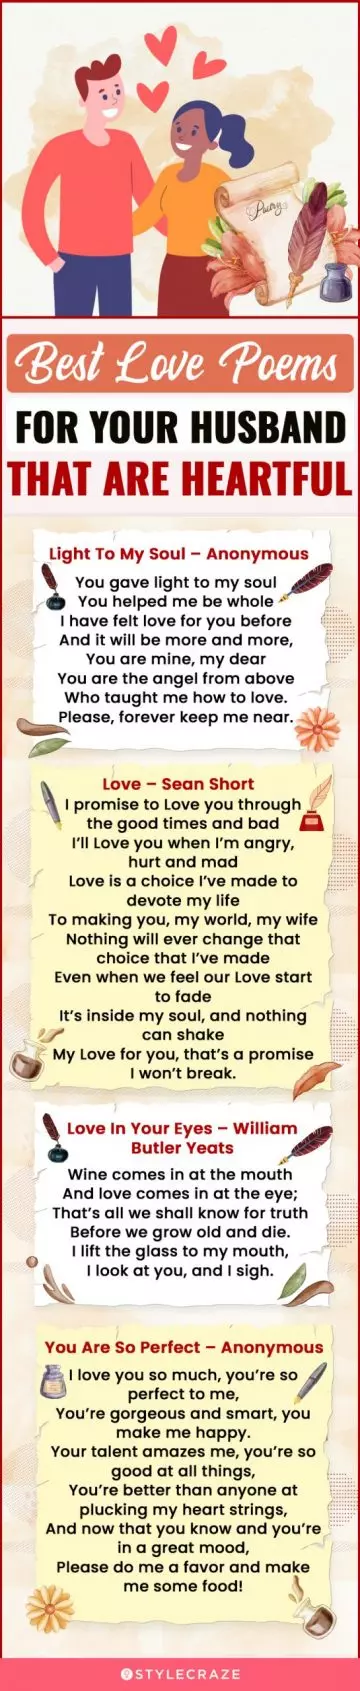 best love poems for husband from the heart (infographic)